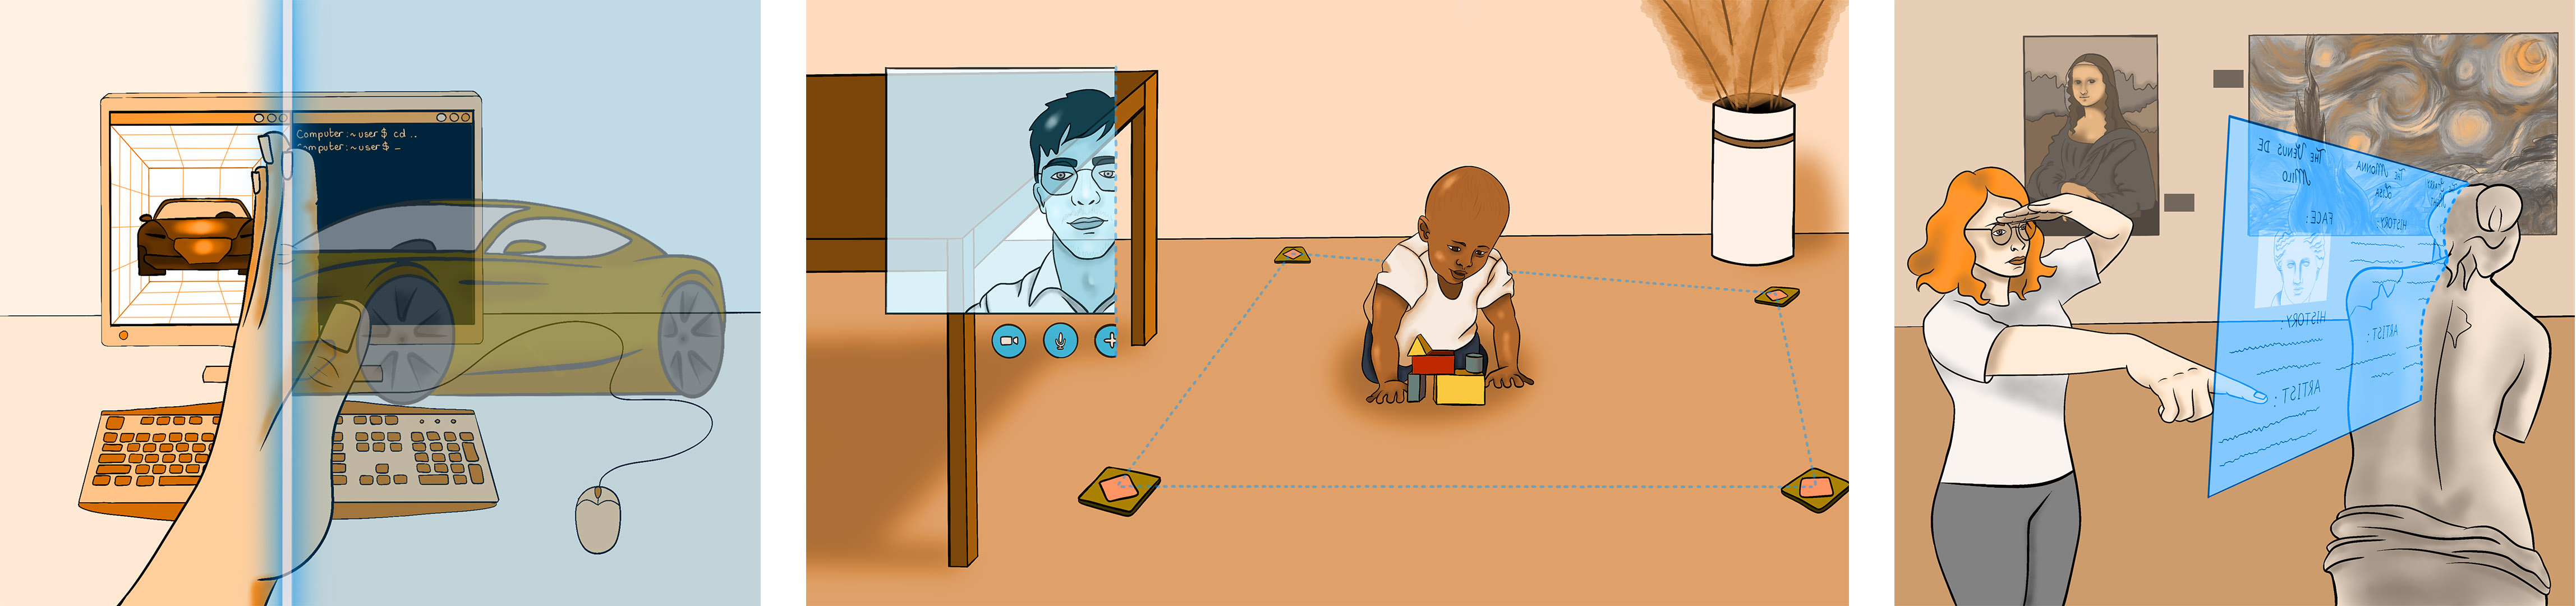 Three illustrations showing three different examples of interaction for activating de-augmentation. The first illustration is a different environment from the perspective of the wearer of the AR headset. It shows a real desktop screen and the augmented content of a virtual car. The AR user has made a swipe gesture from left to right in front of their field of view - this has resulted in part of their field of view to be de-augmented. The second illustration shows a AR scene from the perspective of the wearer of the AR headset. Here the AR user has placed real physical tokens around their baby playing on the floor, which has created a de-augmentation volume around their baby. The third illustration is seen from the third perspective - we see a user wearing an AR headset in a museum. By pointing with one hand and putting her other hand on her forehead, as if shading her eyes, the AR user has chosen to de-augmented a physical statue.